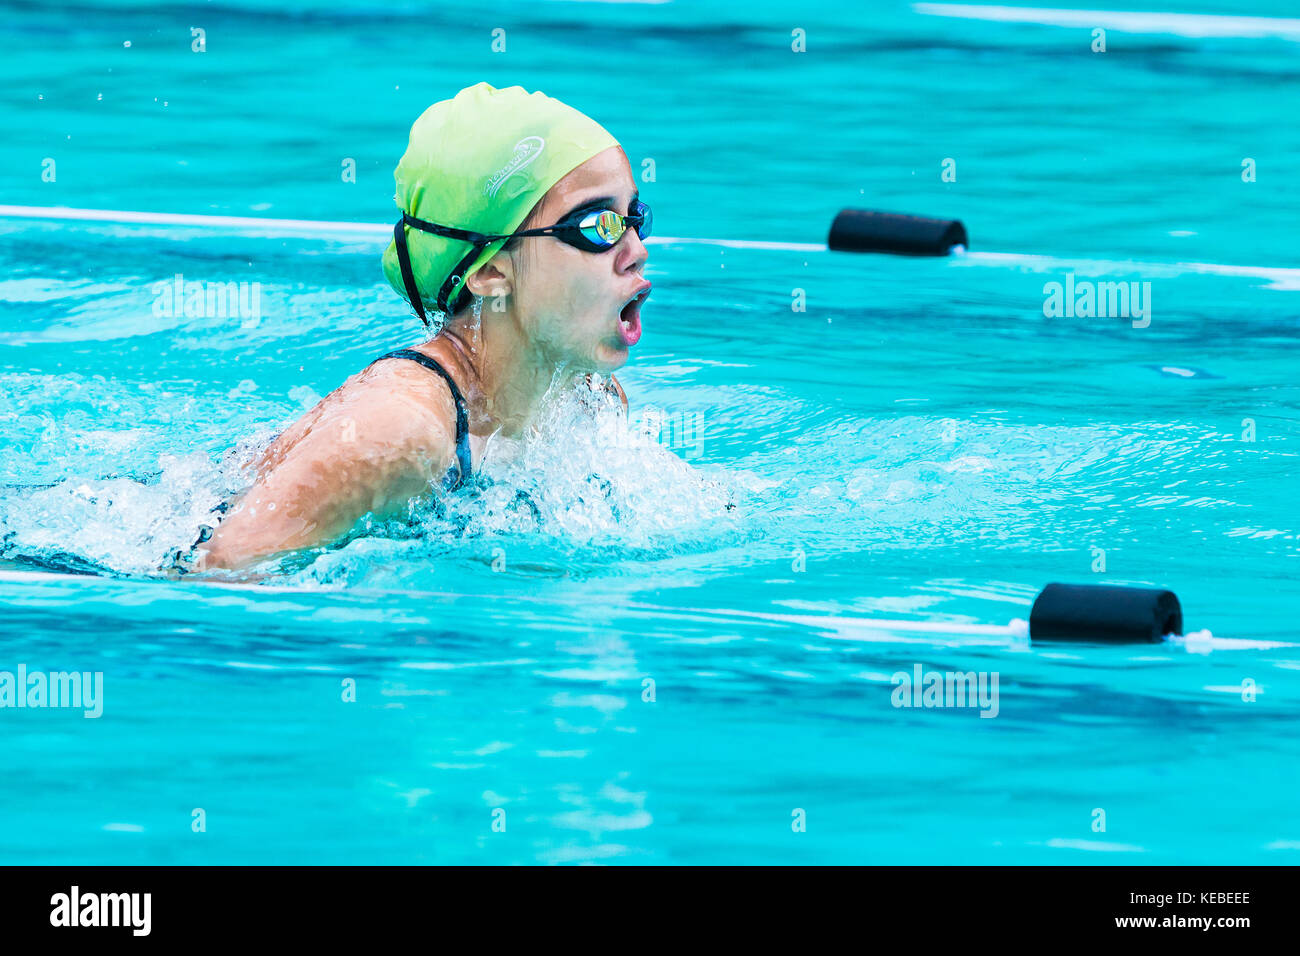 Chiang Mai, Thailand - 11 October 2017 - young female swimmer races in breath stroke and raises up to catch her breath at a school swimming pool in Ch Stock Photo